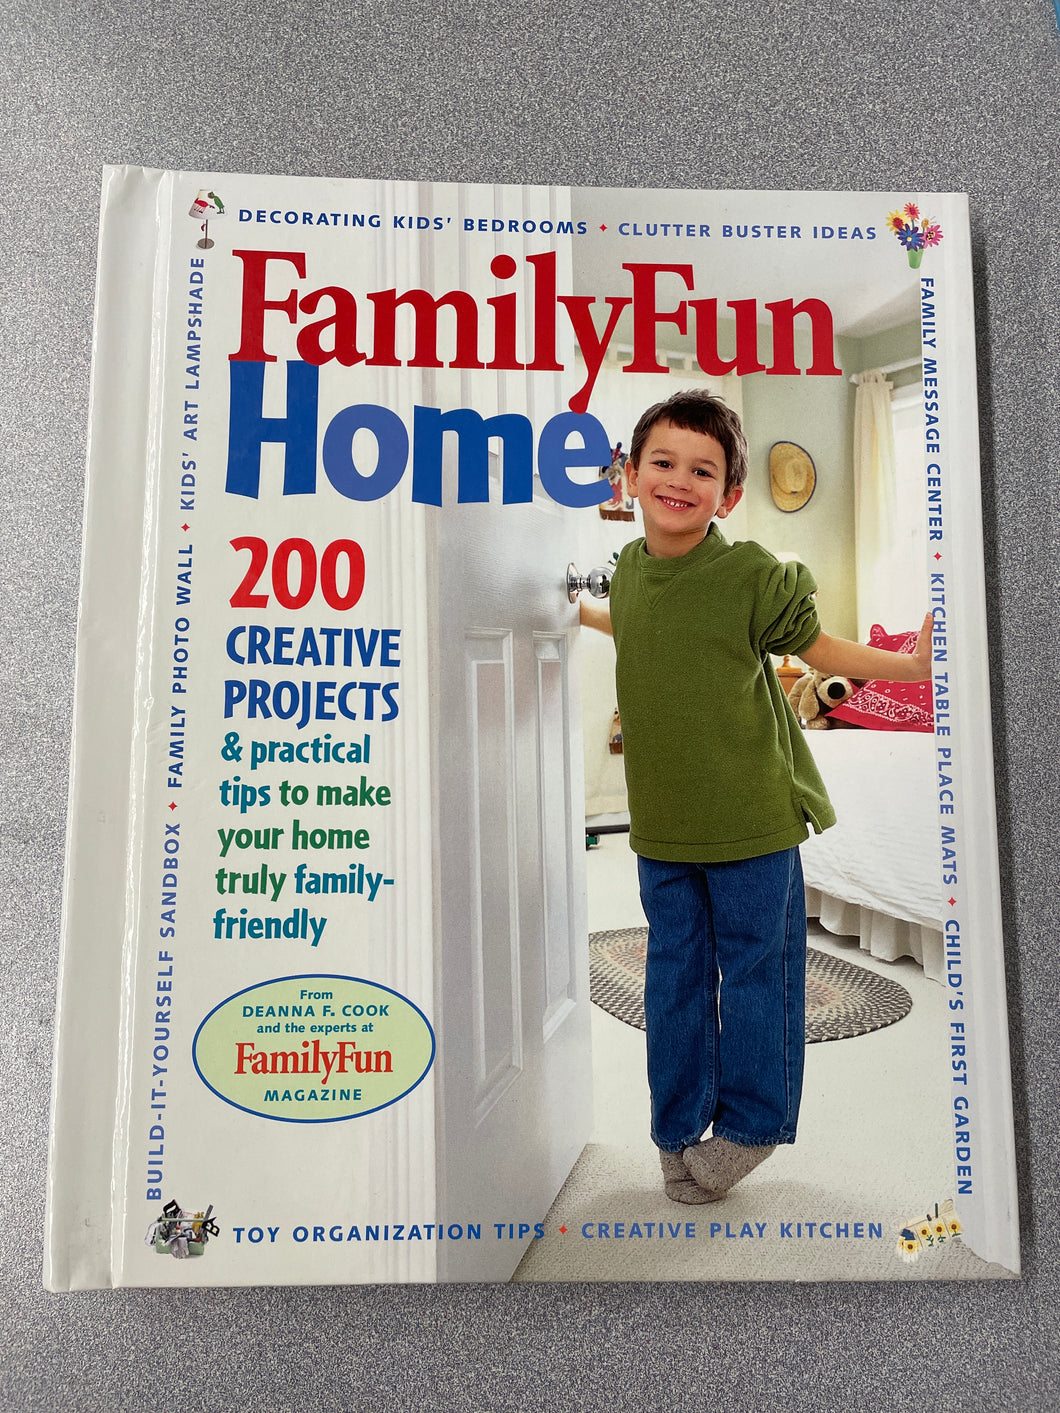 FamilyFun Home: 200 Creative Projects & Practical Tips To Make Your Home Truly Family-Friendly,  Cook, Deanna F. [2003] Cn 2/24